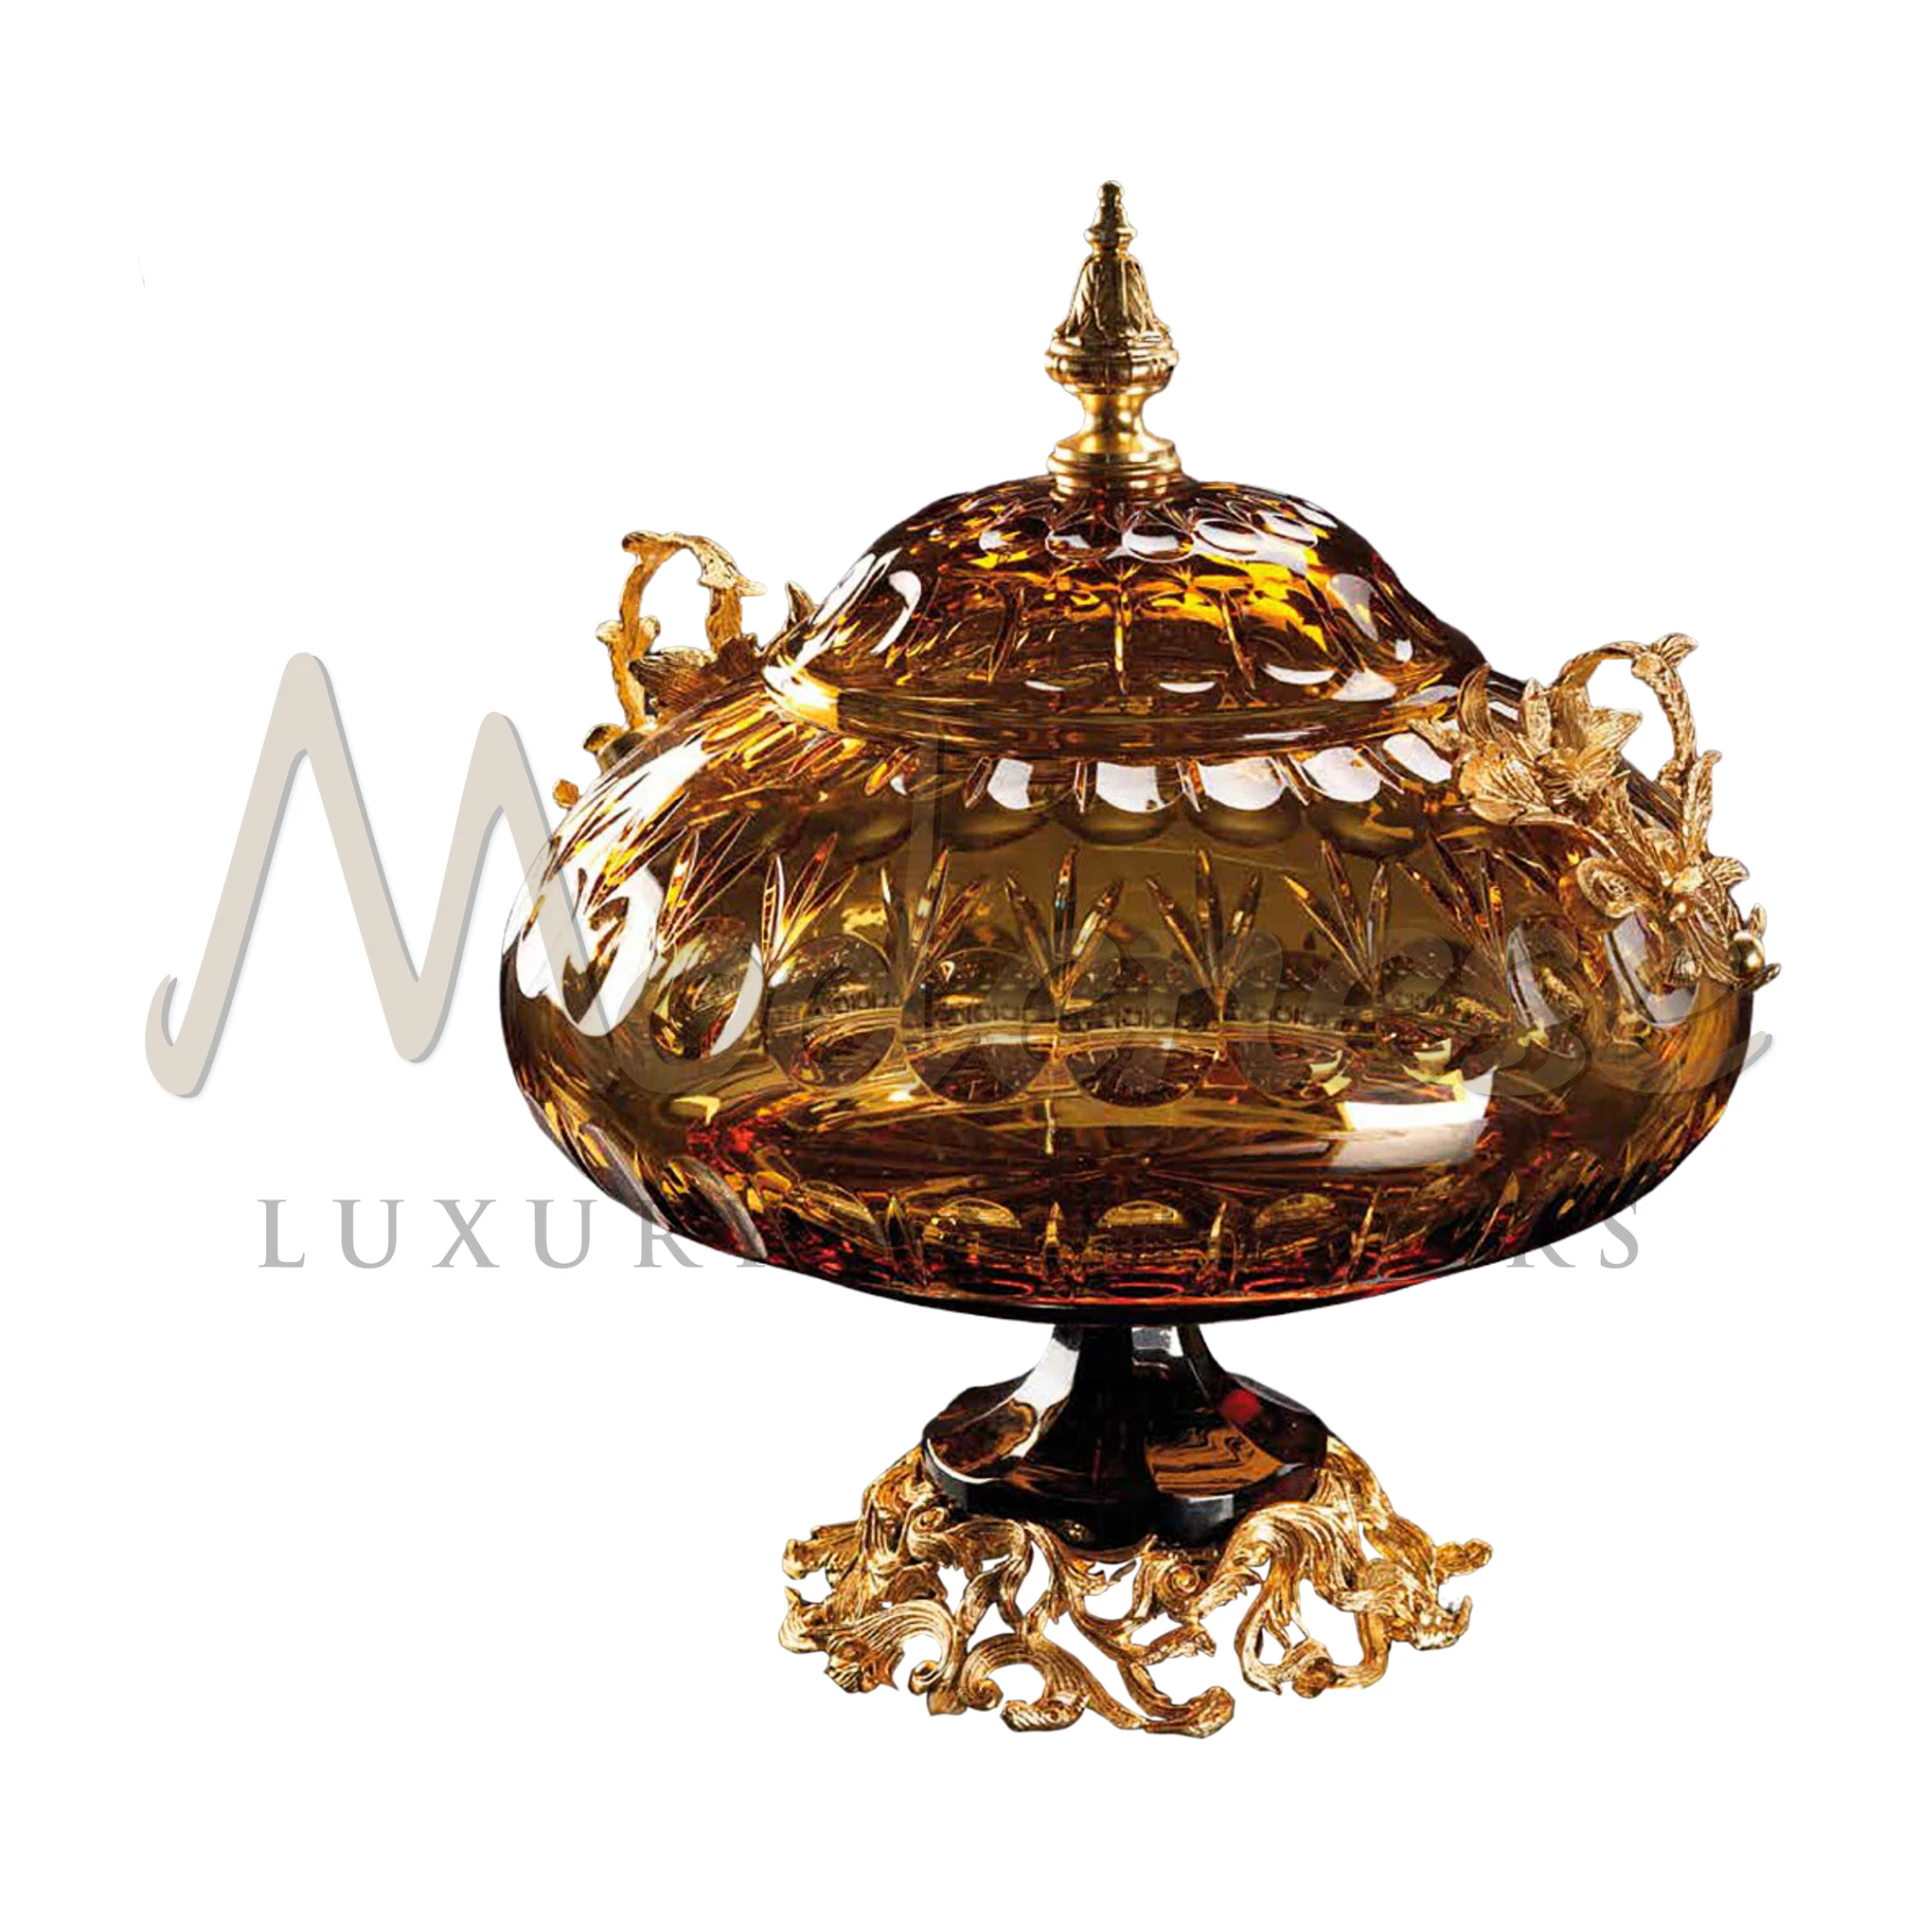 Elegant Classical Style Crystal Bowl with leaf, scroll, and floral motifs, embodying timeless beauty and luxury in interior design.